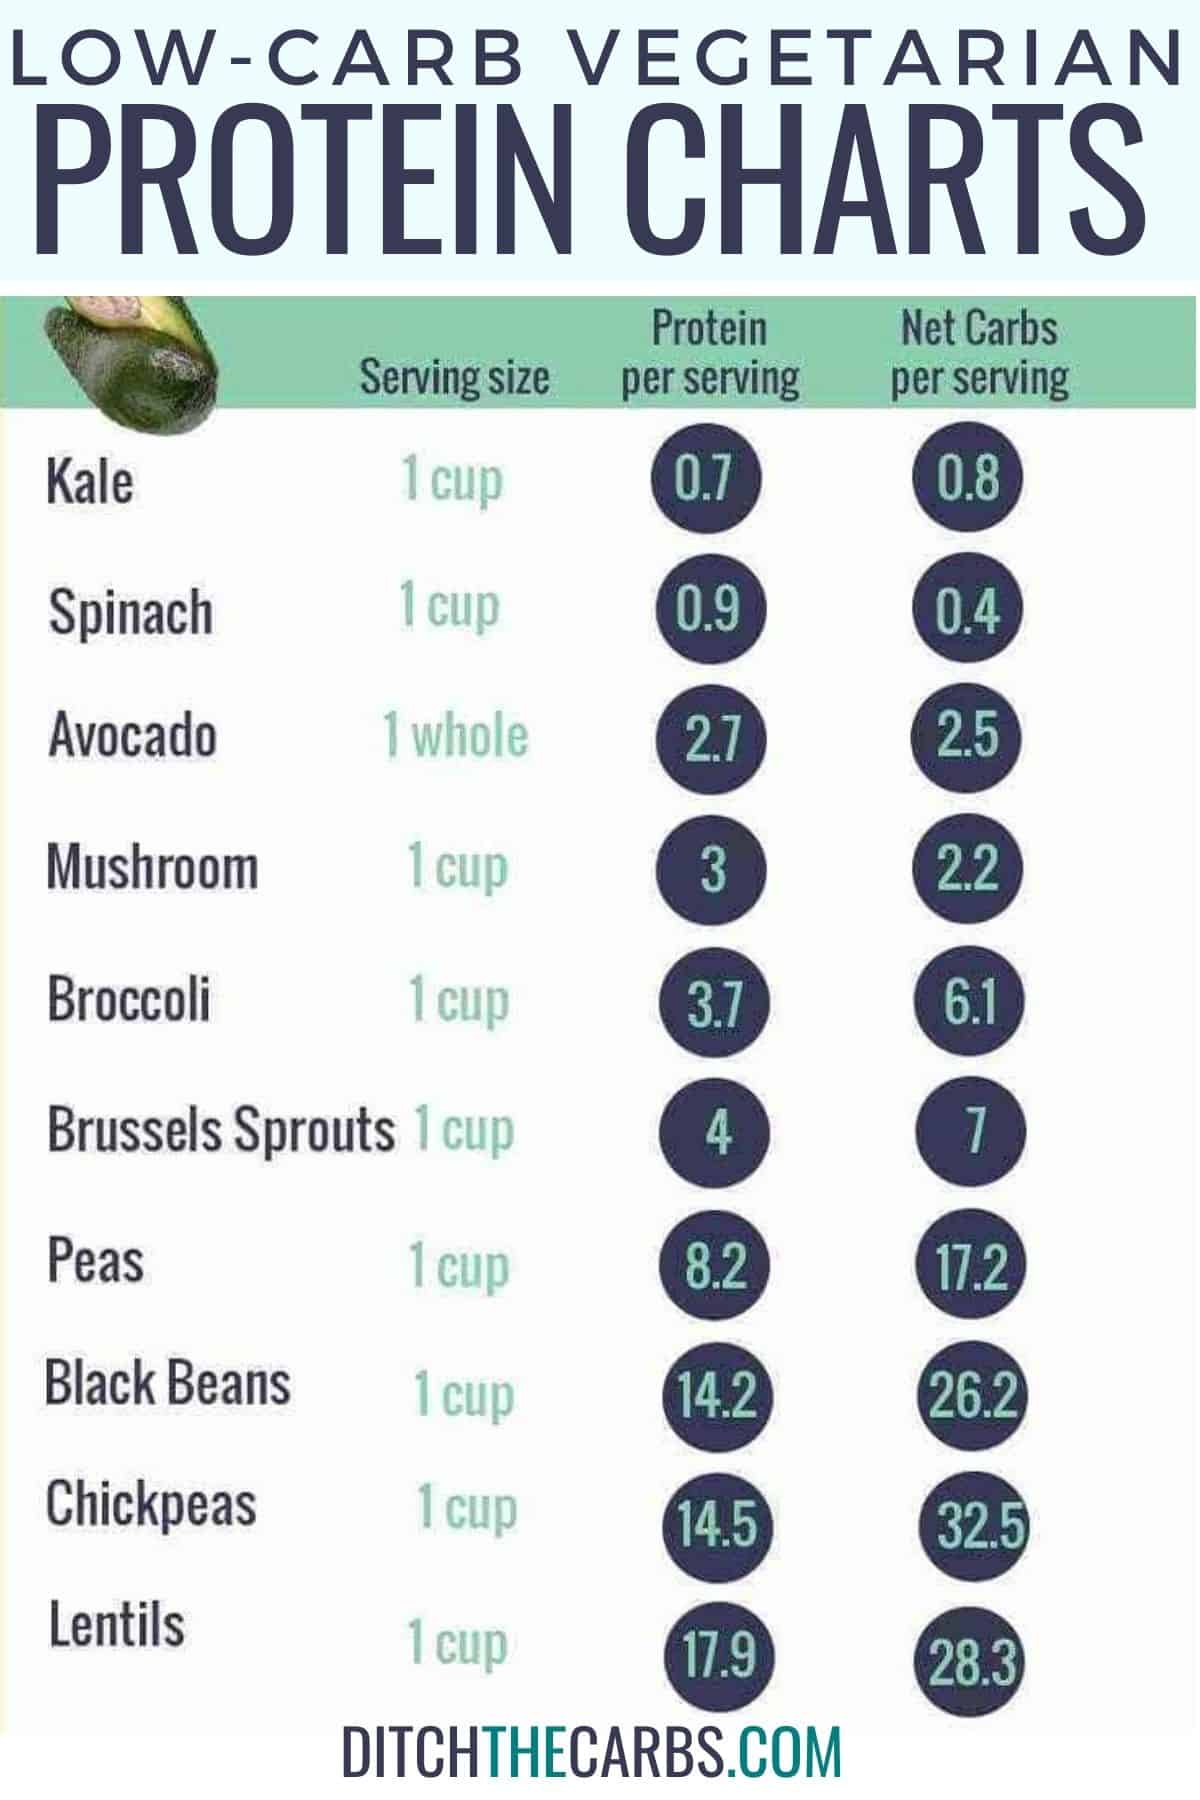 carb charts and protein charts for vegetarian foods